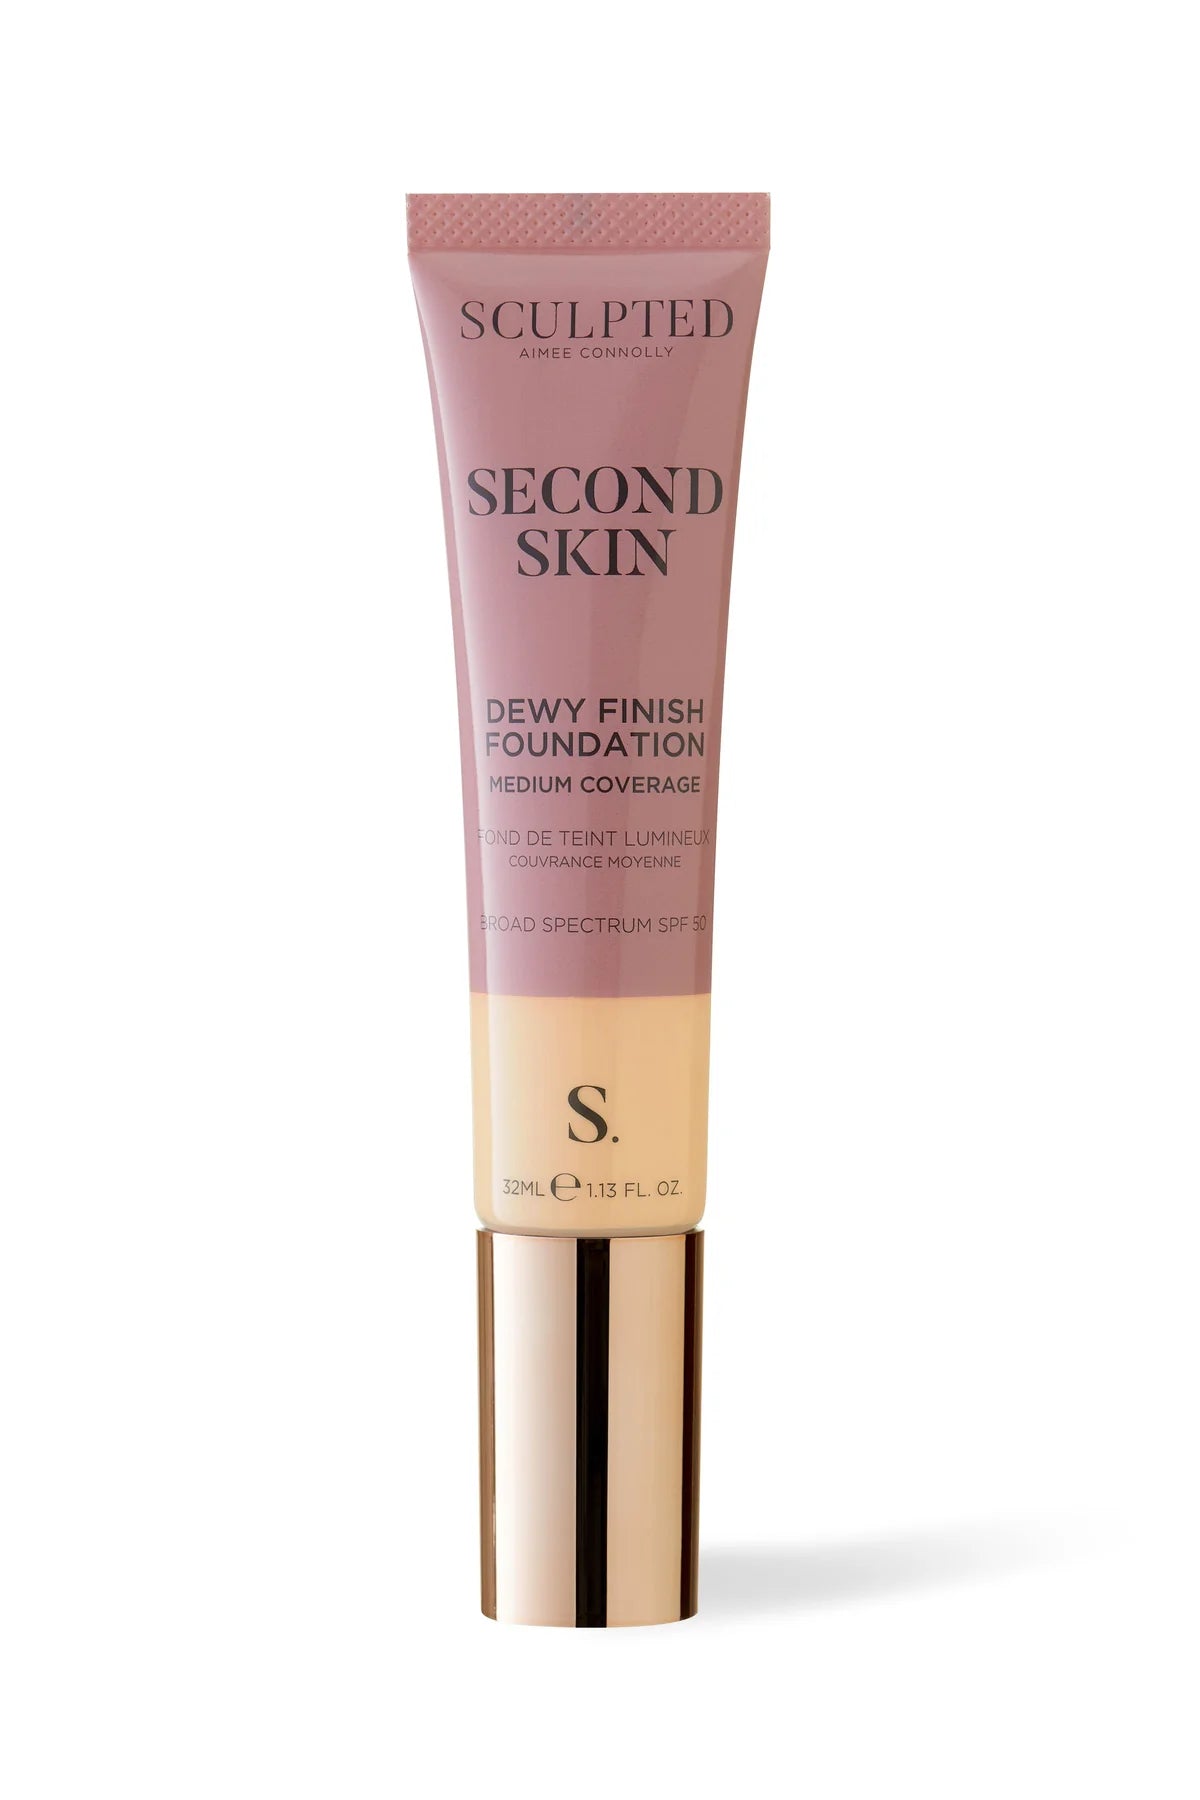 Sculpted by Aimee connolly Second Skin Foundation Dewy